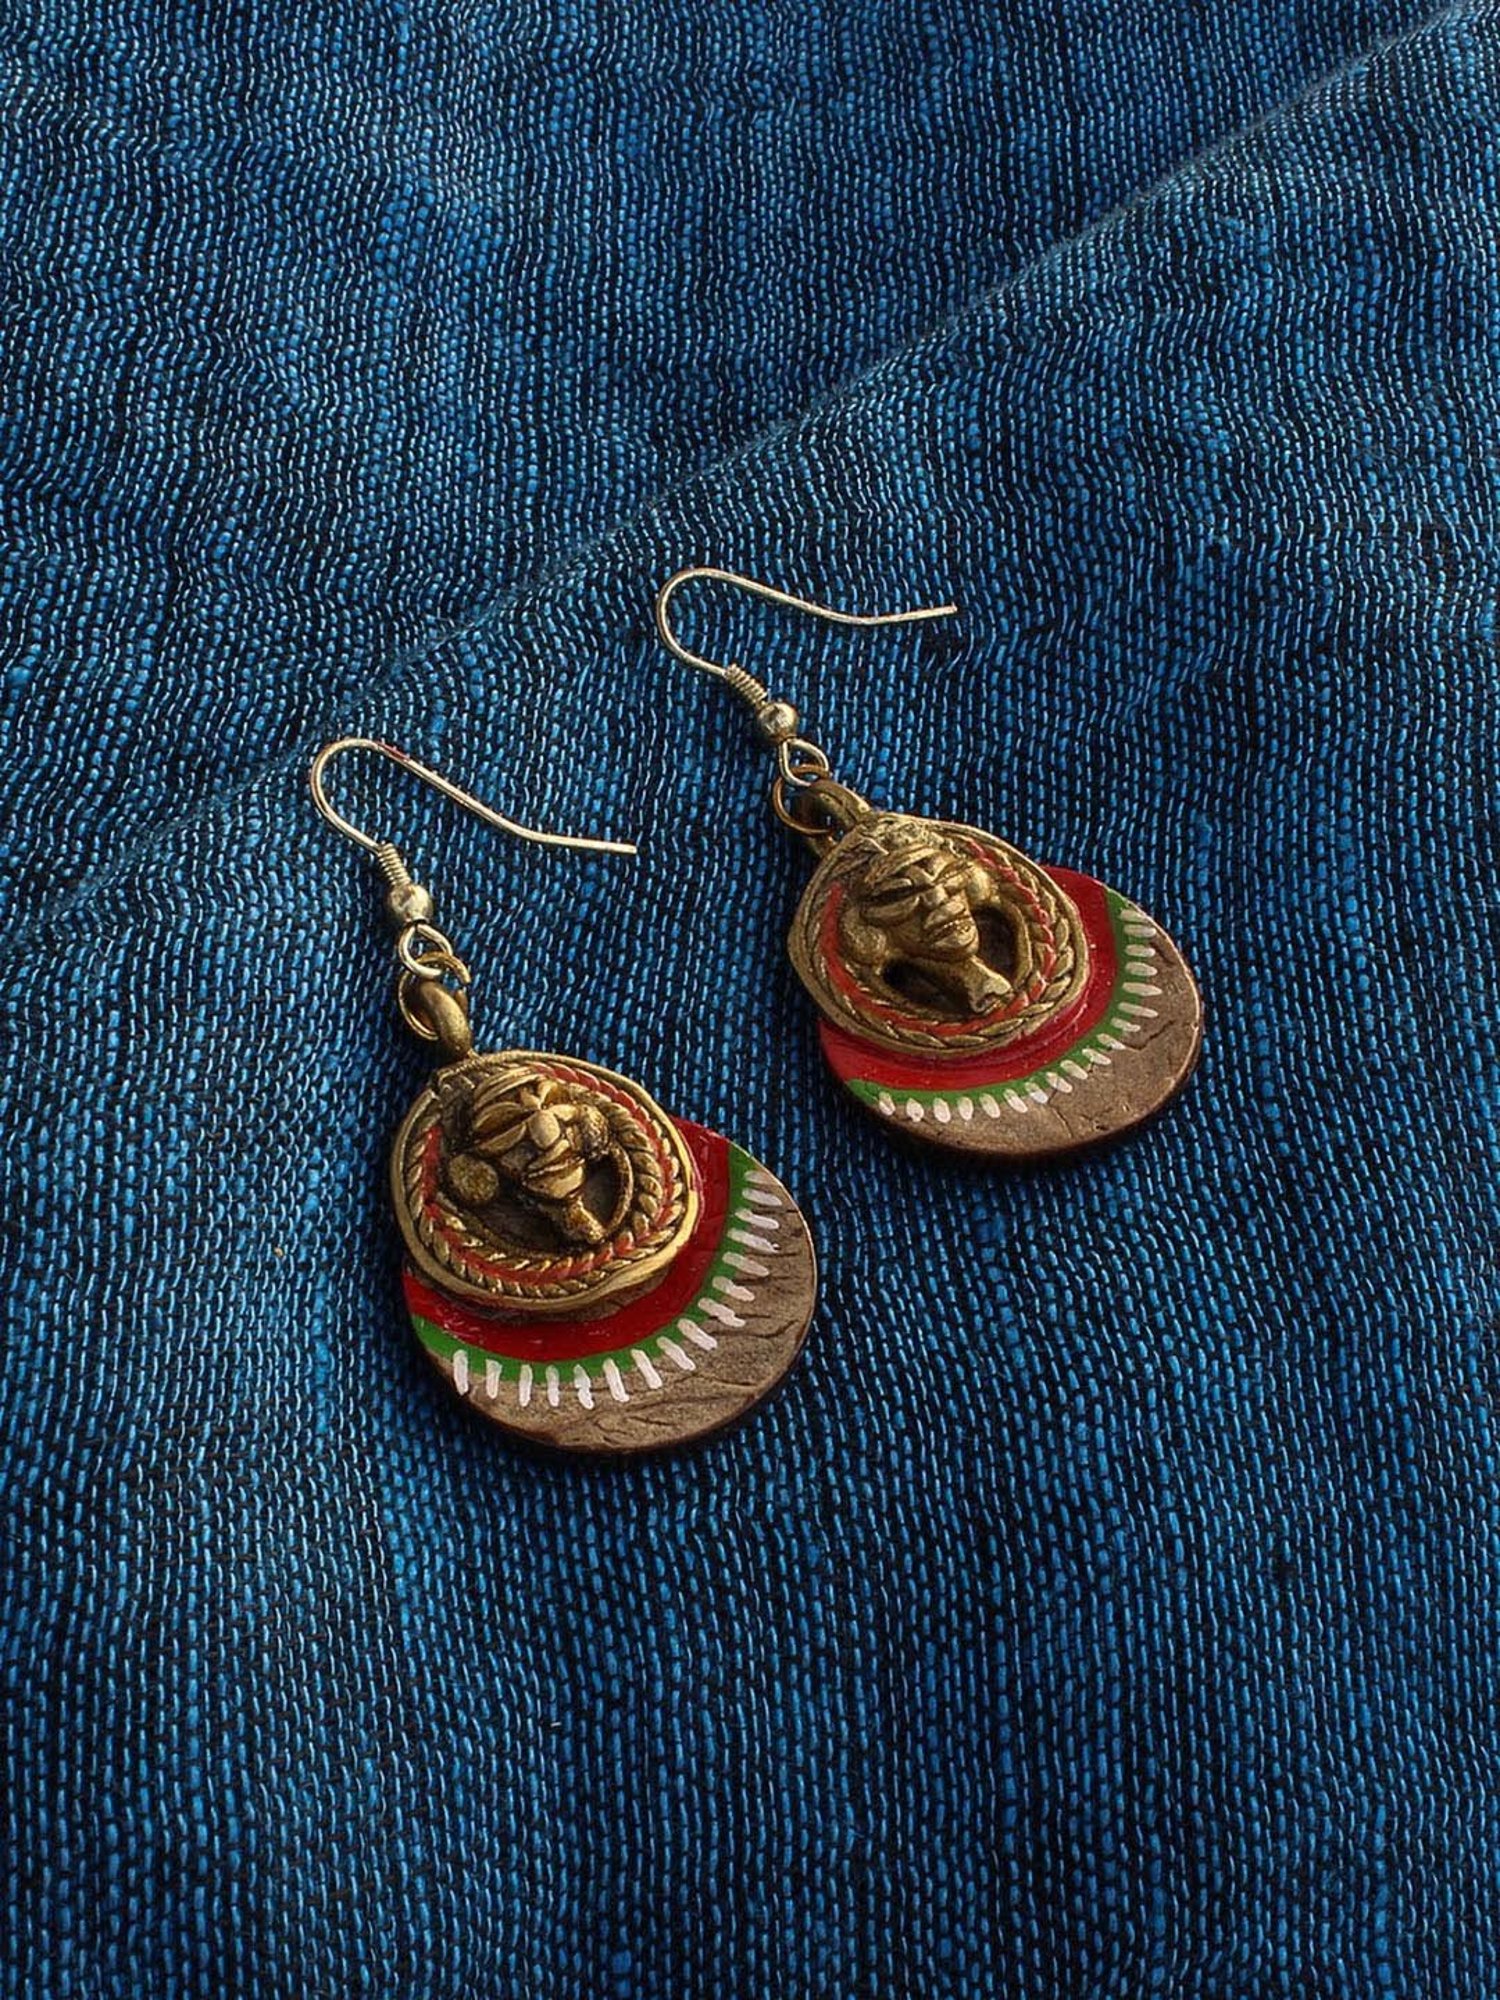 Buy Natural Terracotta Jewellery Set-handcrafted Earthy Clay Earrings and  Necklace for Women,terracotta Jewelry,handmade Necklace,ethnic Jewelry  Online in India - Etsy